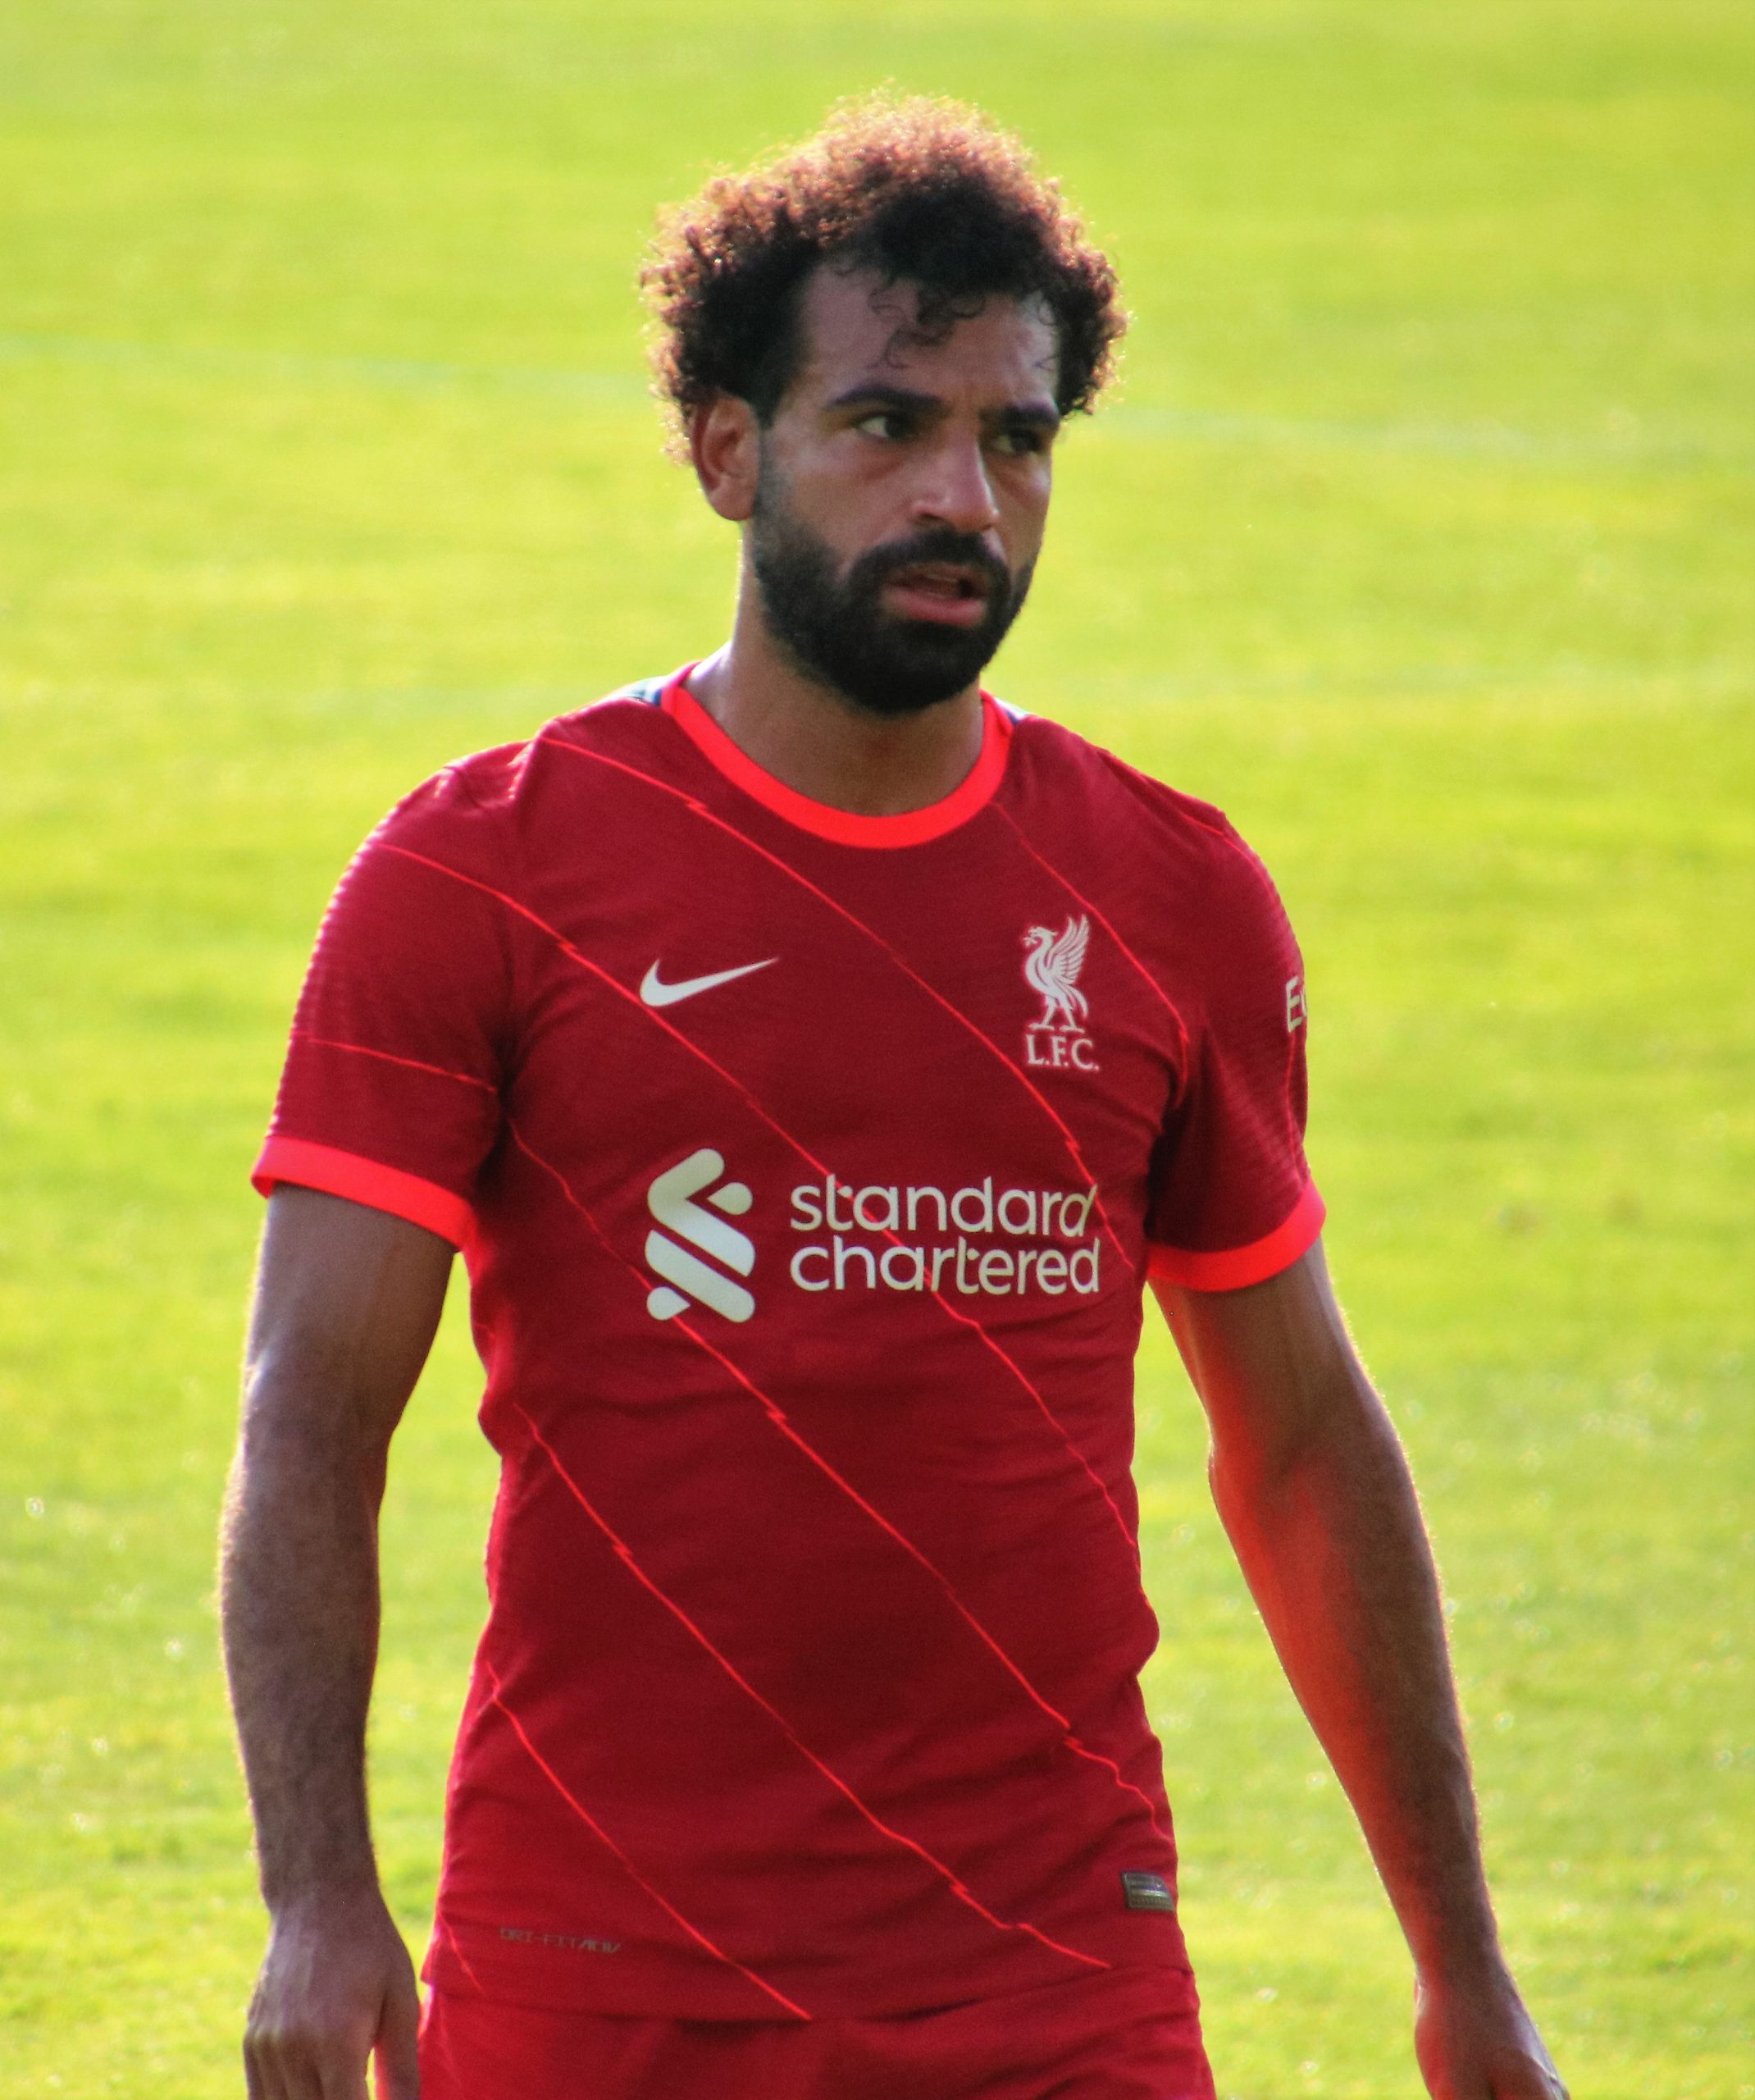 mo salah on a football pitch in a red jersey